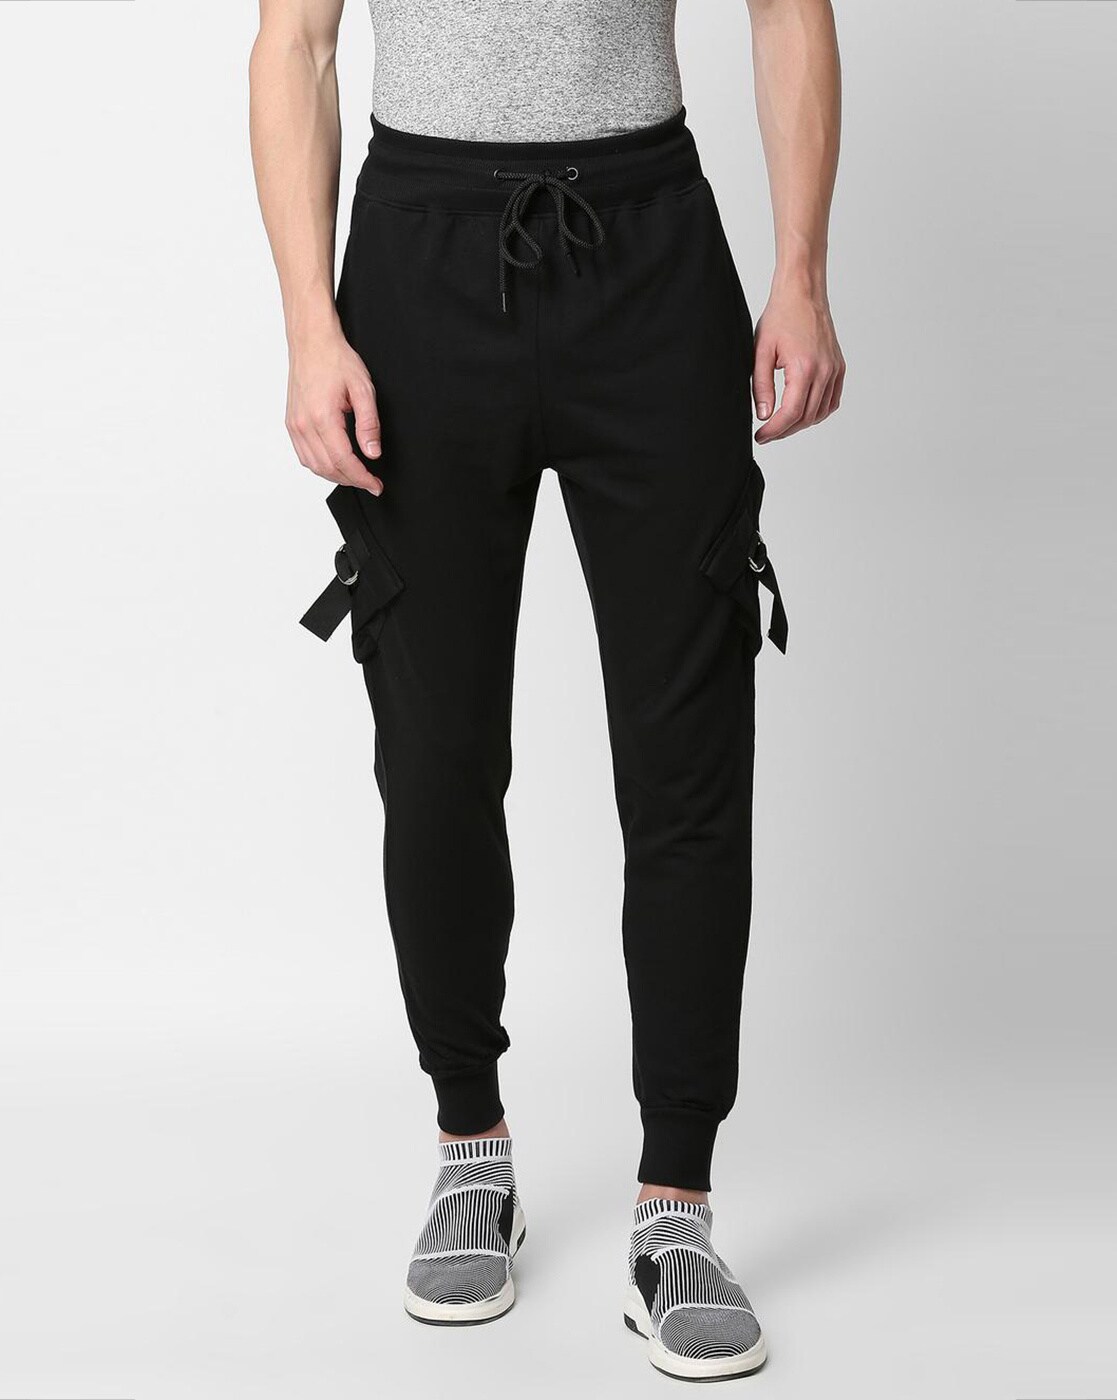 Buy Black & Red Track Pants for Men by SKULT by Shahid Kapoor Online |  Ajio.com